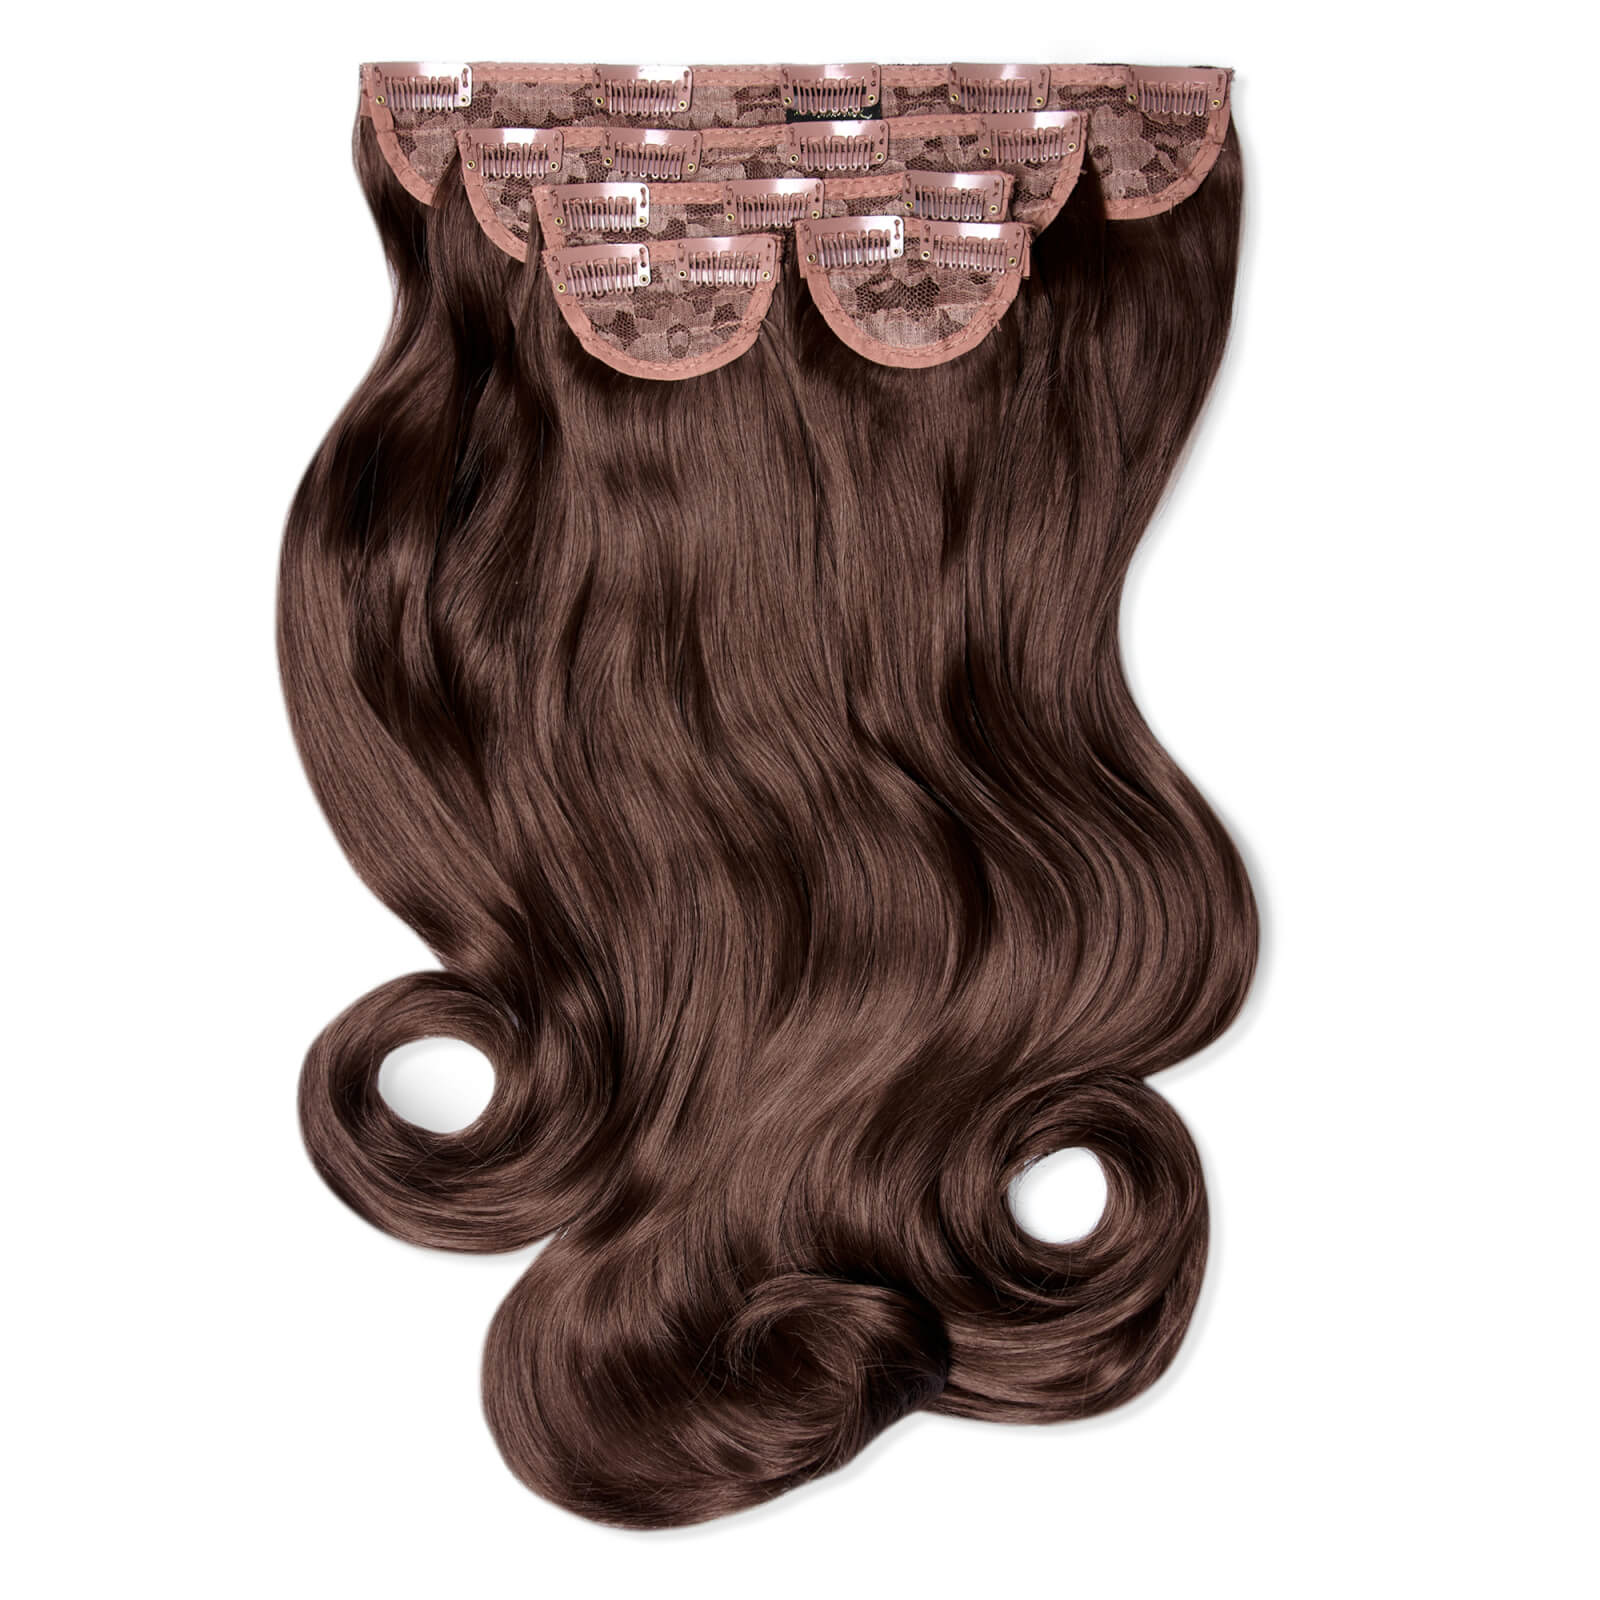 Image of LullaBellz Super Thick 22 5 Piece Natural Wavy Clip In Extensions (Various Shades) - Chestnut